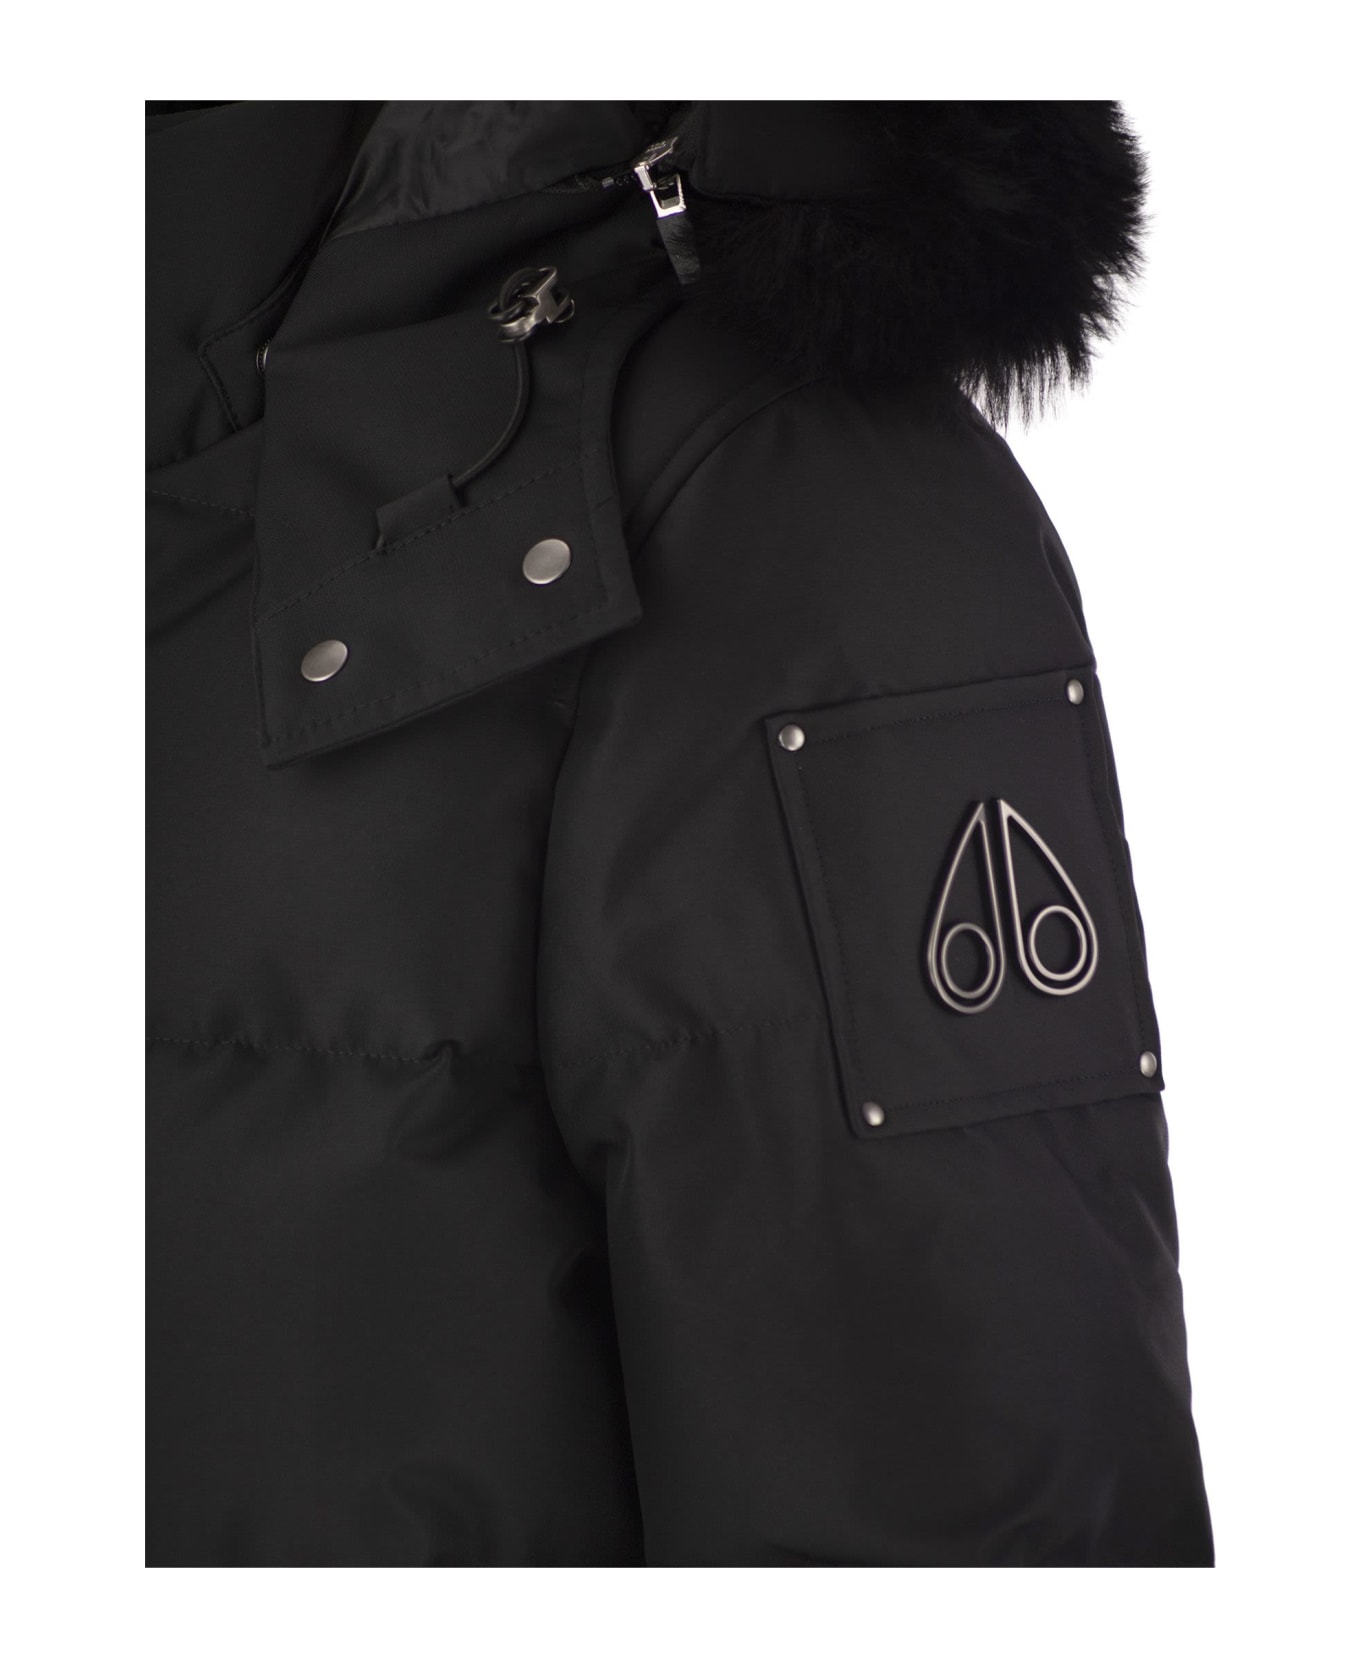 Moose Knuckles Cloud 3q - Down Jacket With Hood And Fur - Black コート